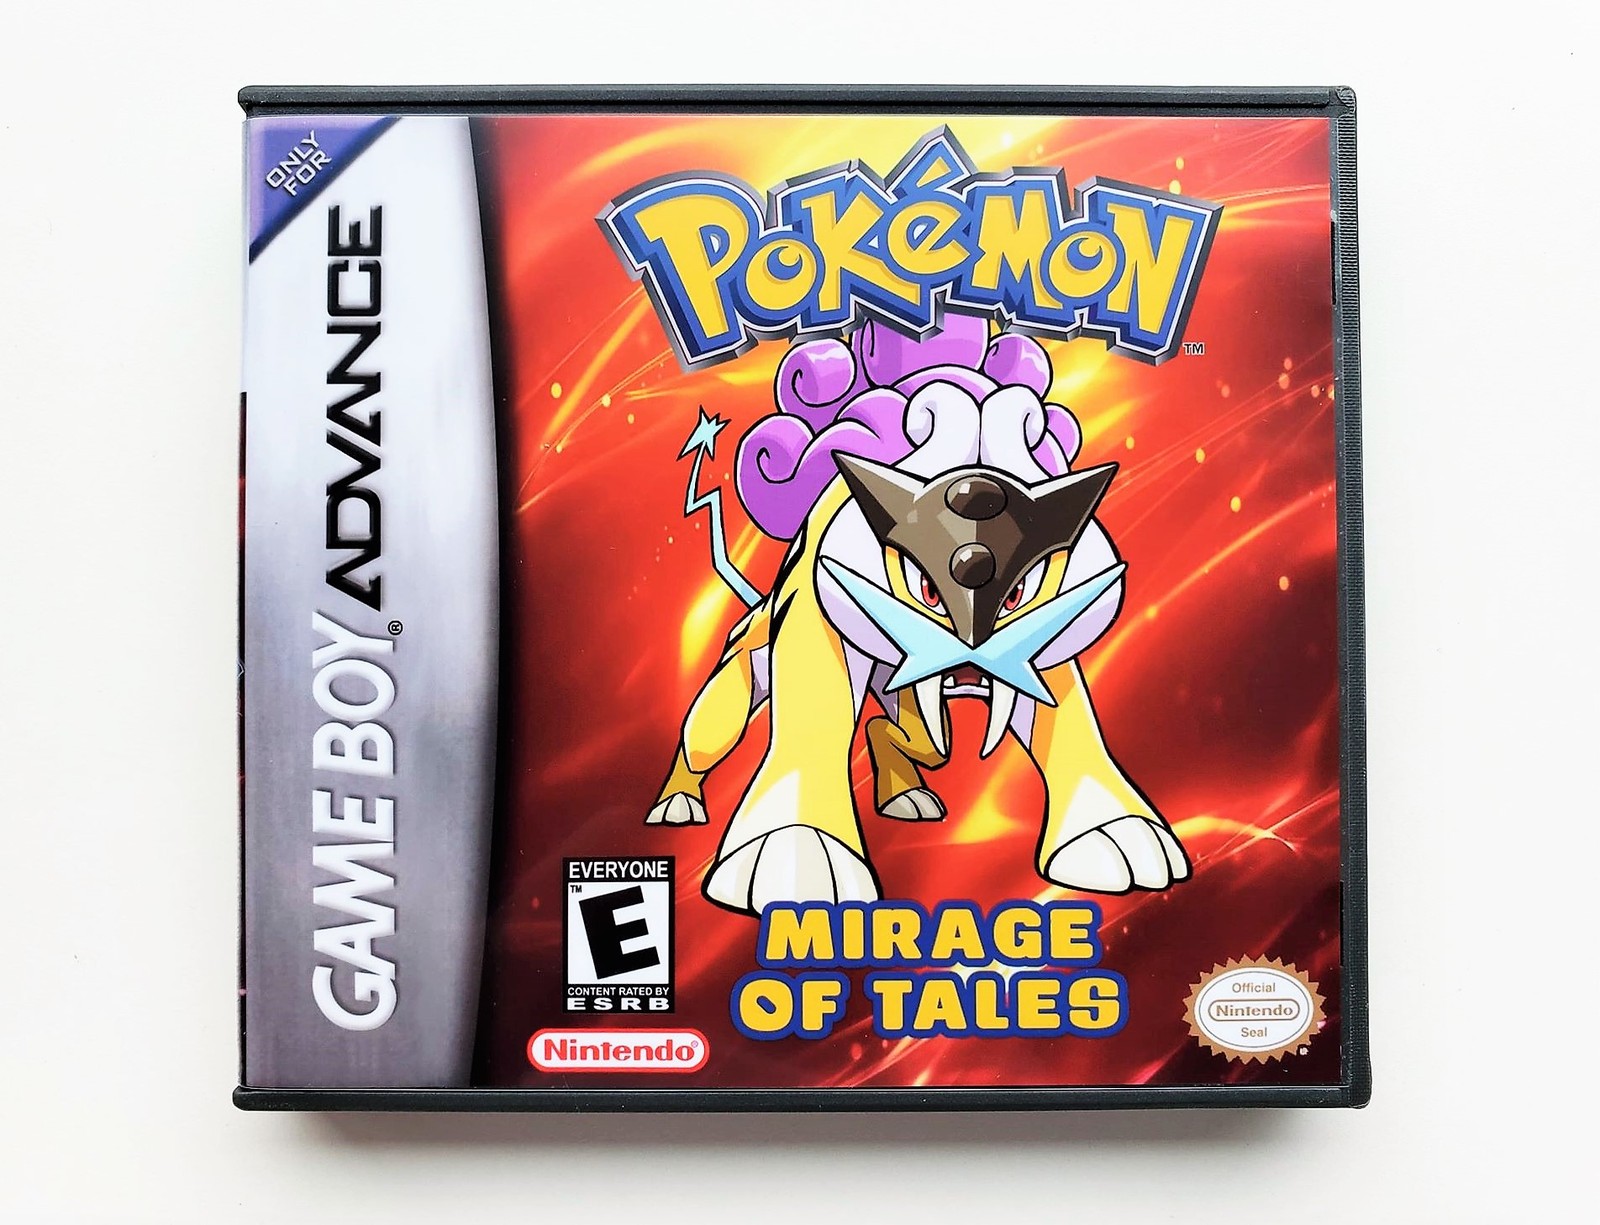 Pokemon Mirage of Tales Game / Case - Gameboy Advance (GBA) USA Seller